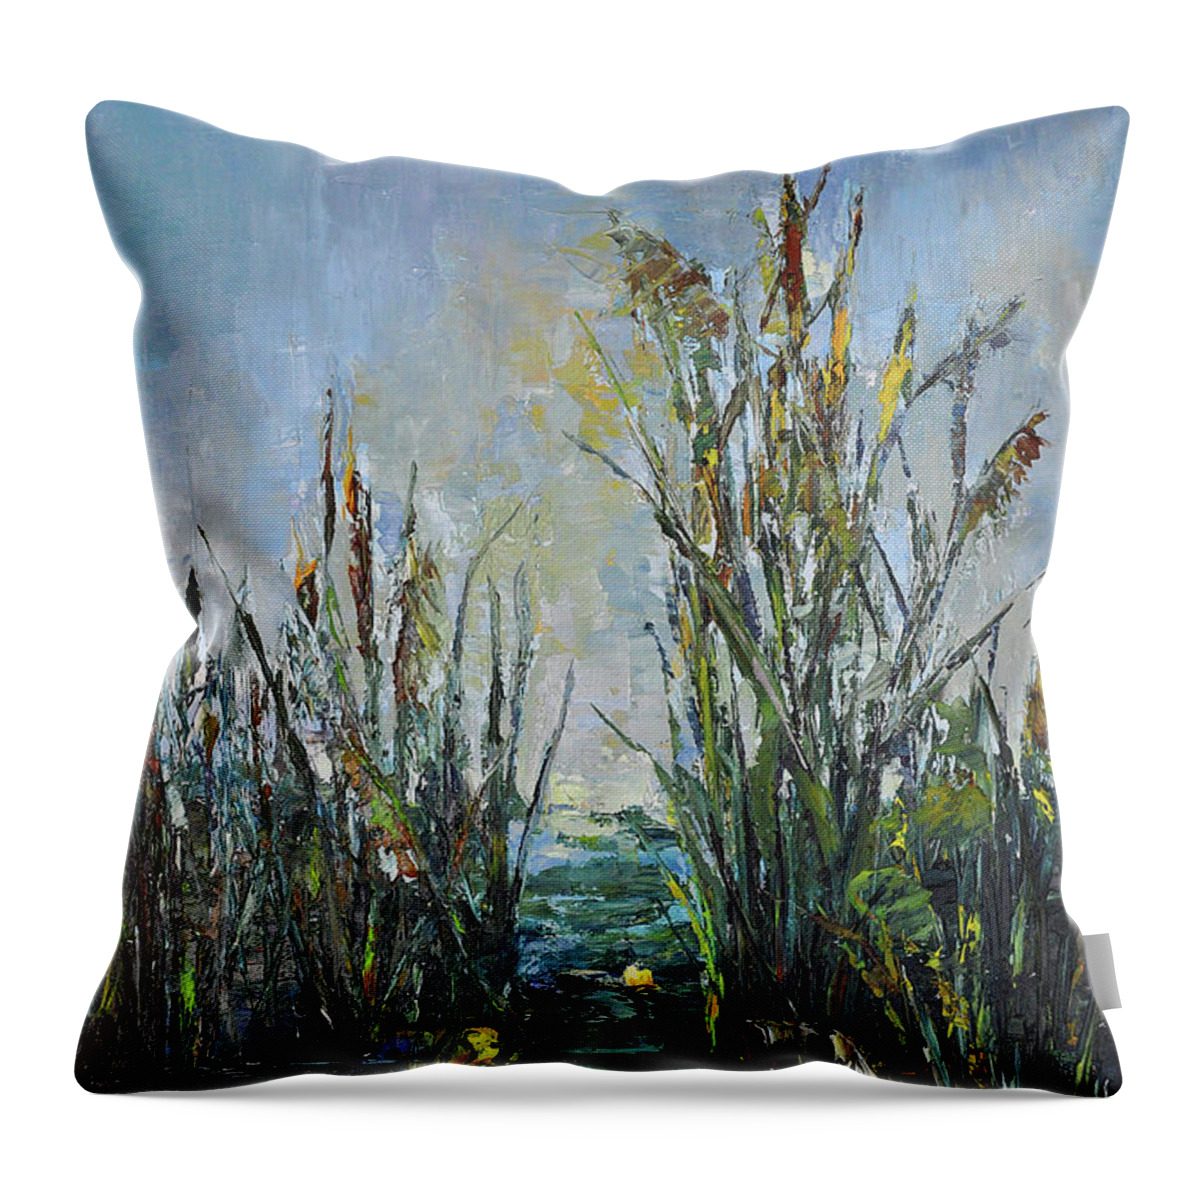  Bay Throw Pillow featuring the painting Bays Of The River by Tetiana Korol